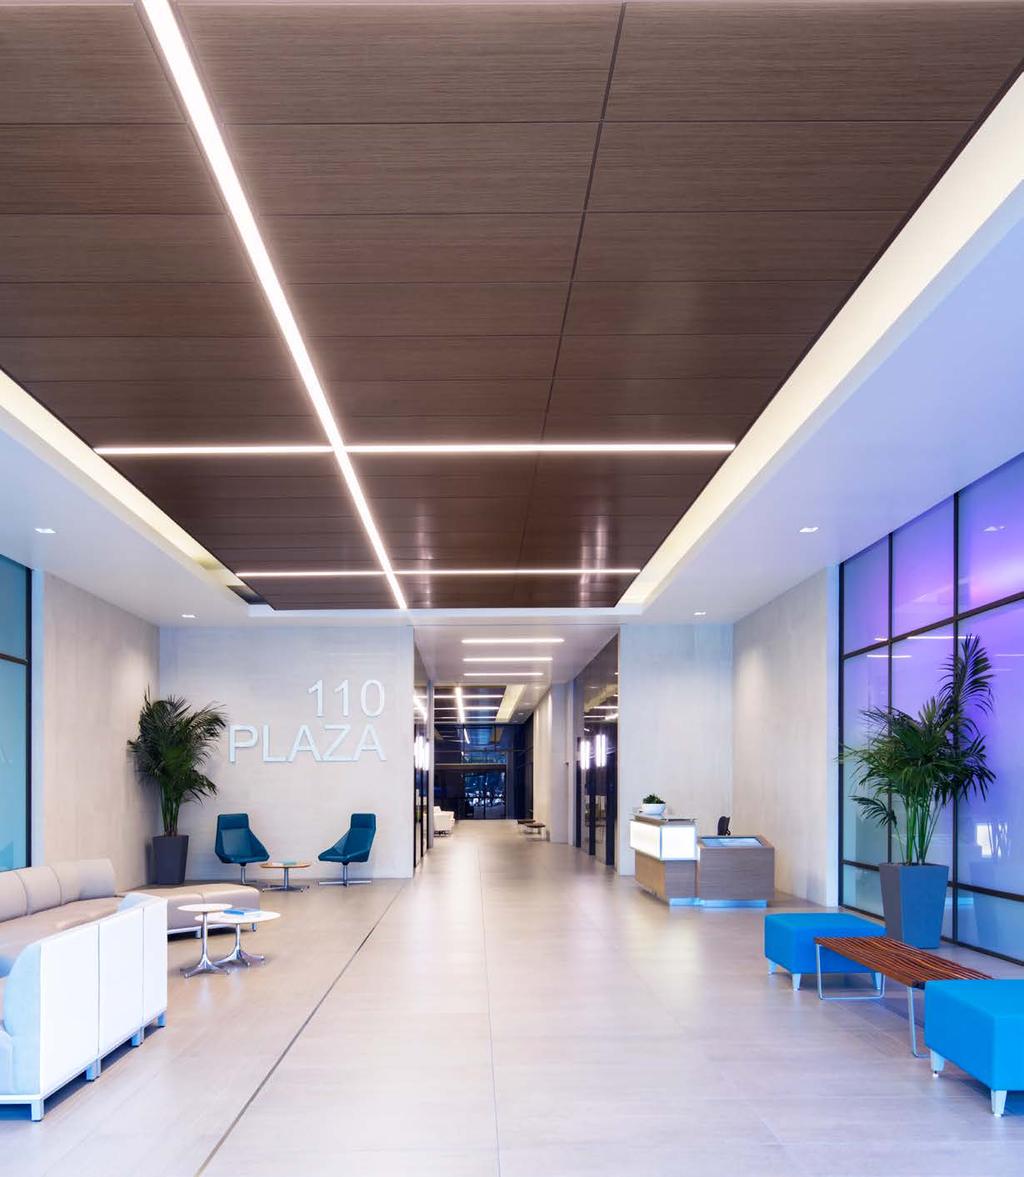 RENOVATED LOBBY & PLAZA is an approximate 335,000 square foot, Class A office project on the west side of Downtown San Diego.